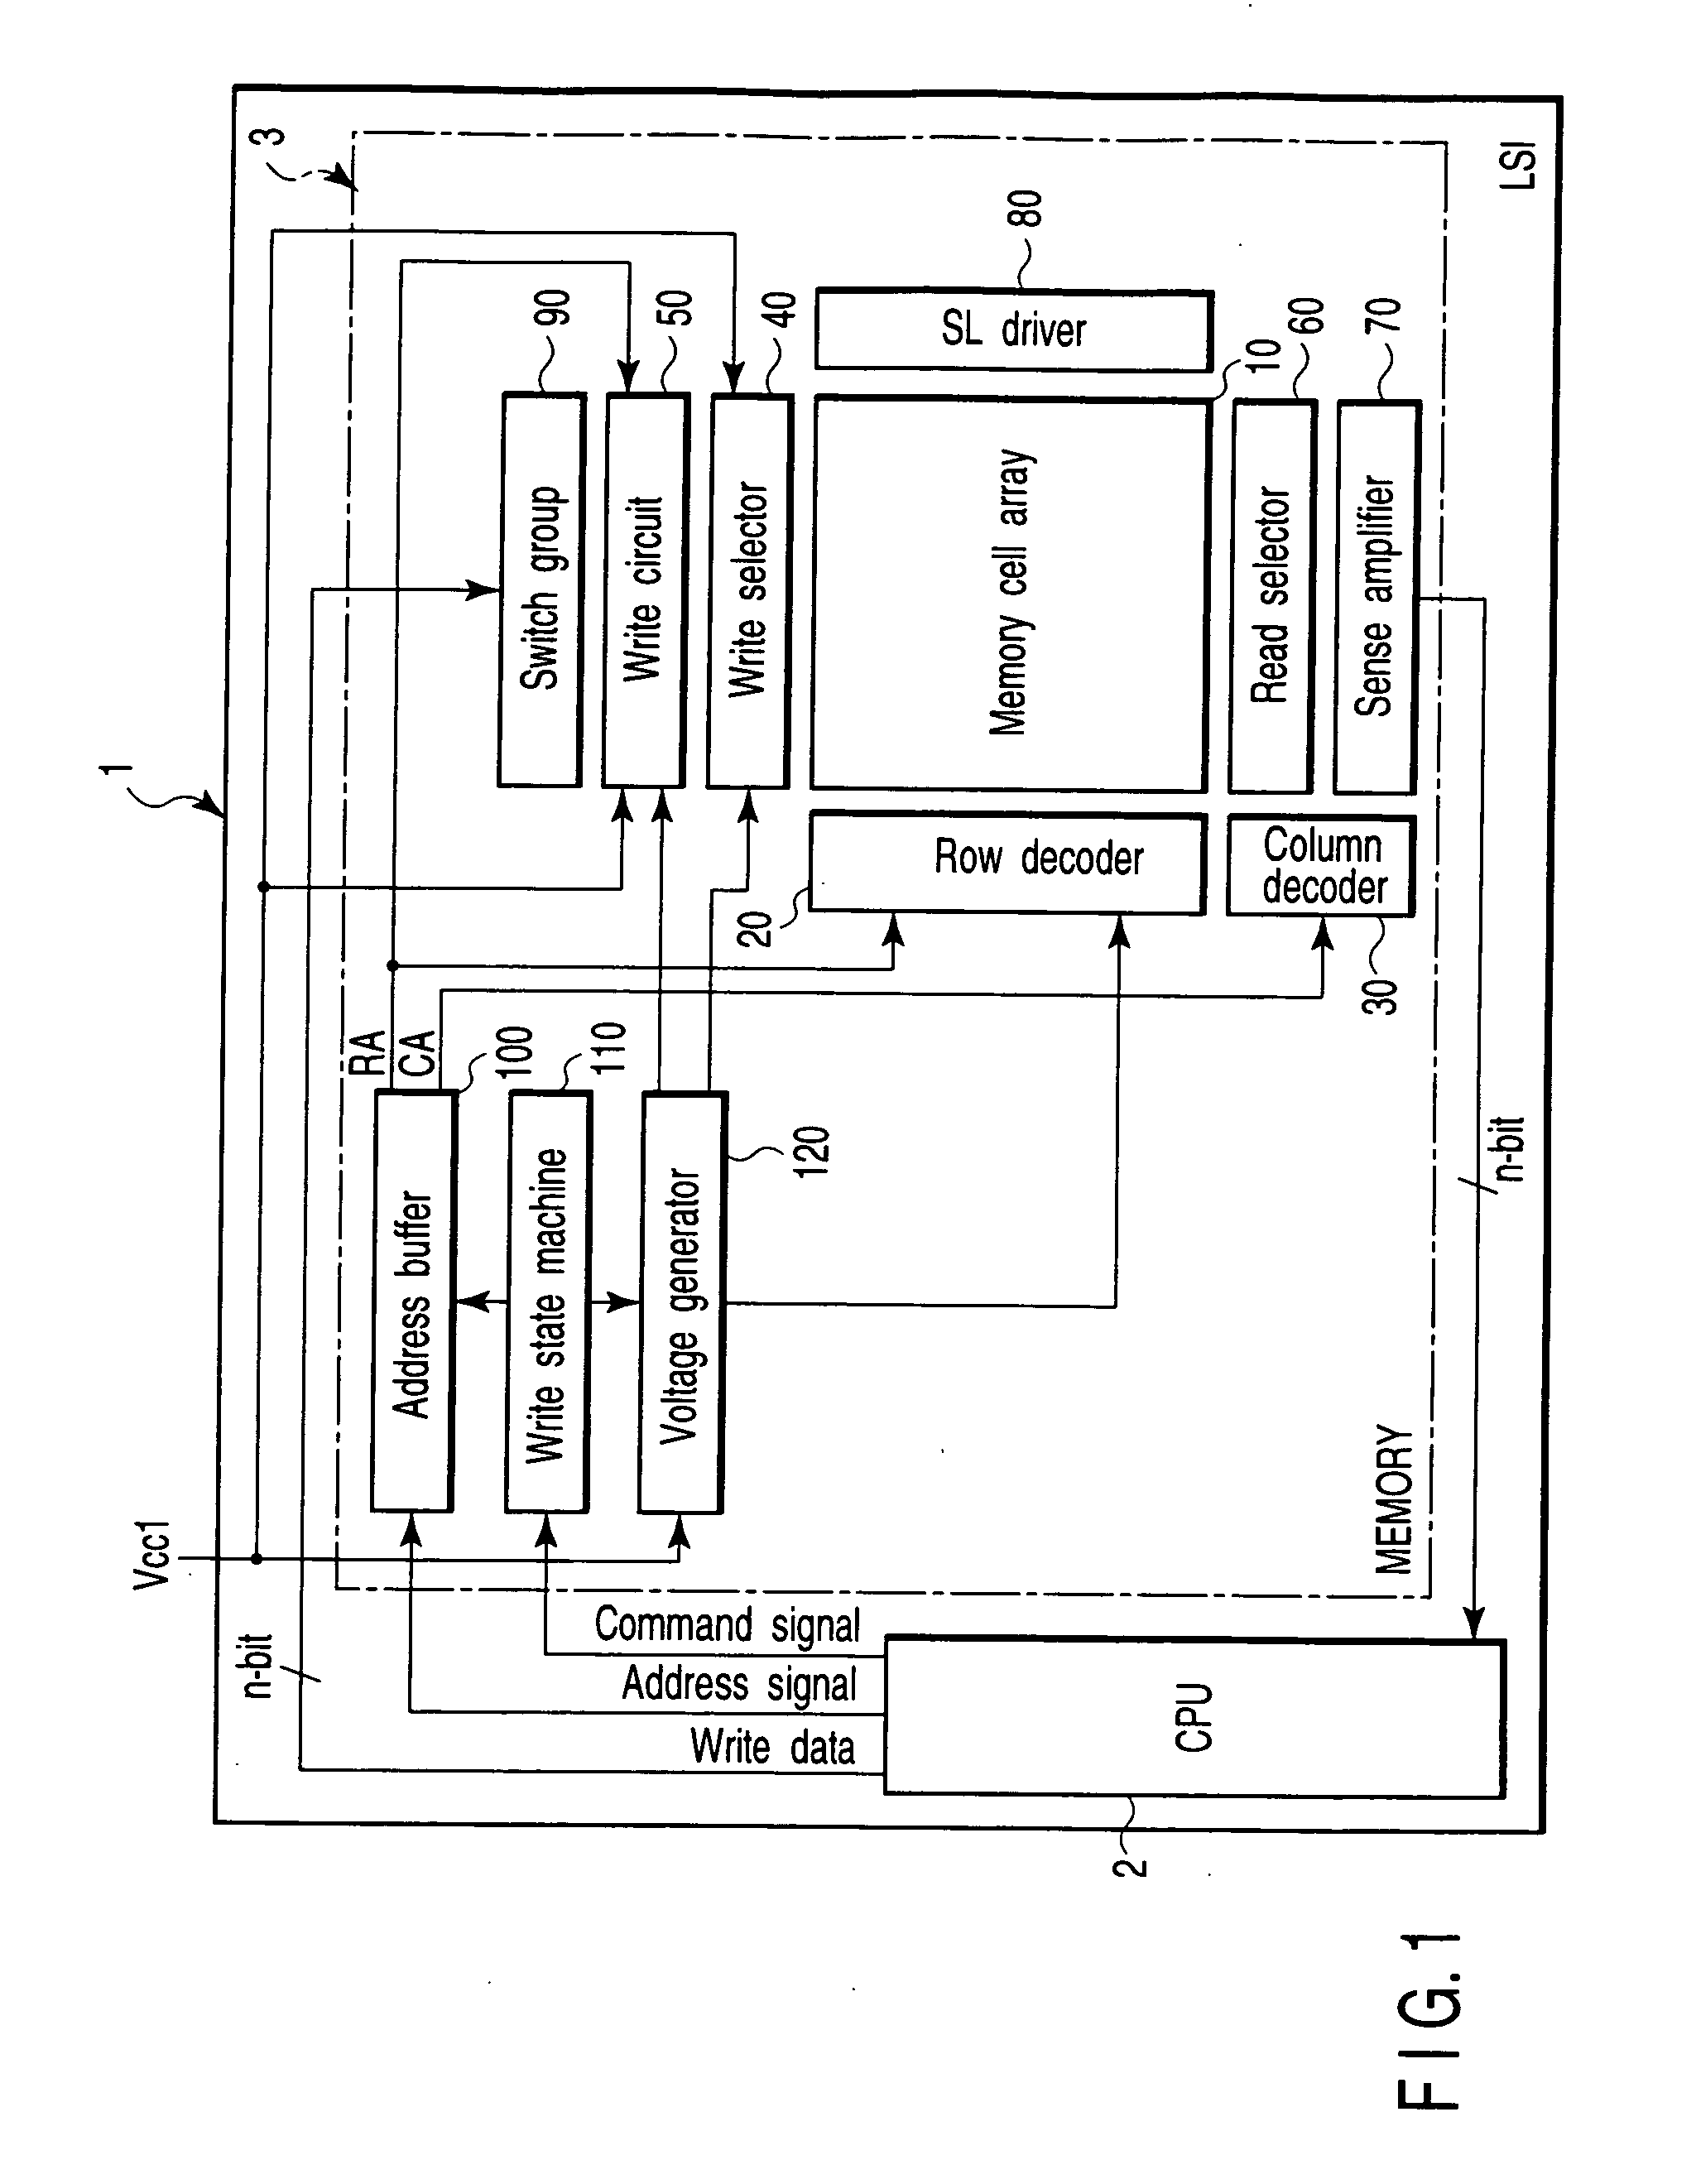 Semiconductor memory device with MOS transistors, each including a floating gate and a control gate, and a memory card including the same